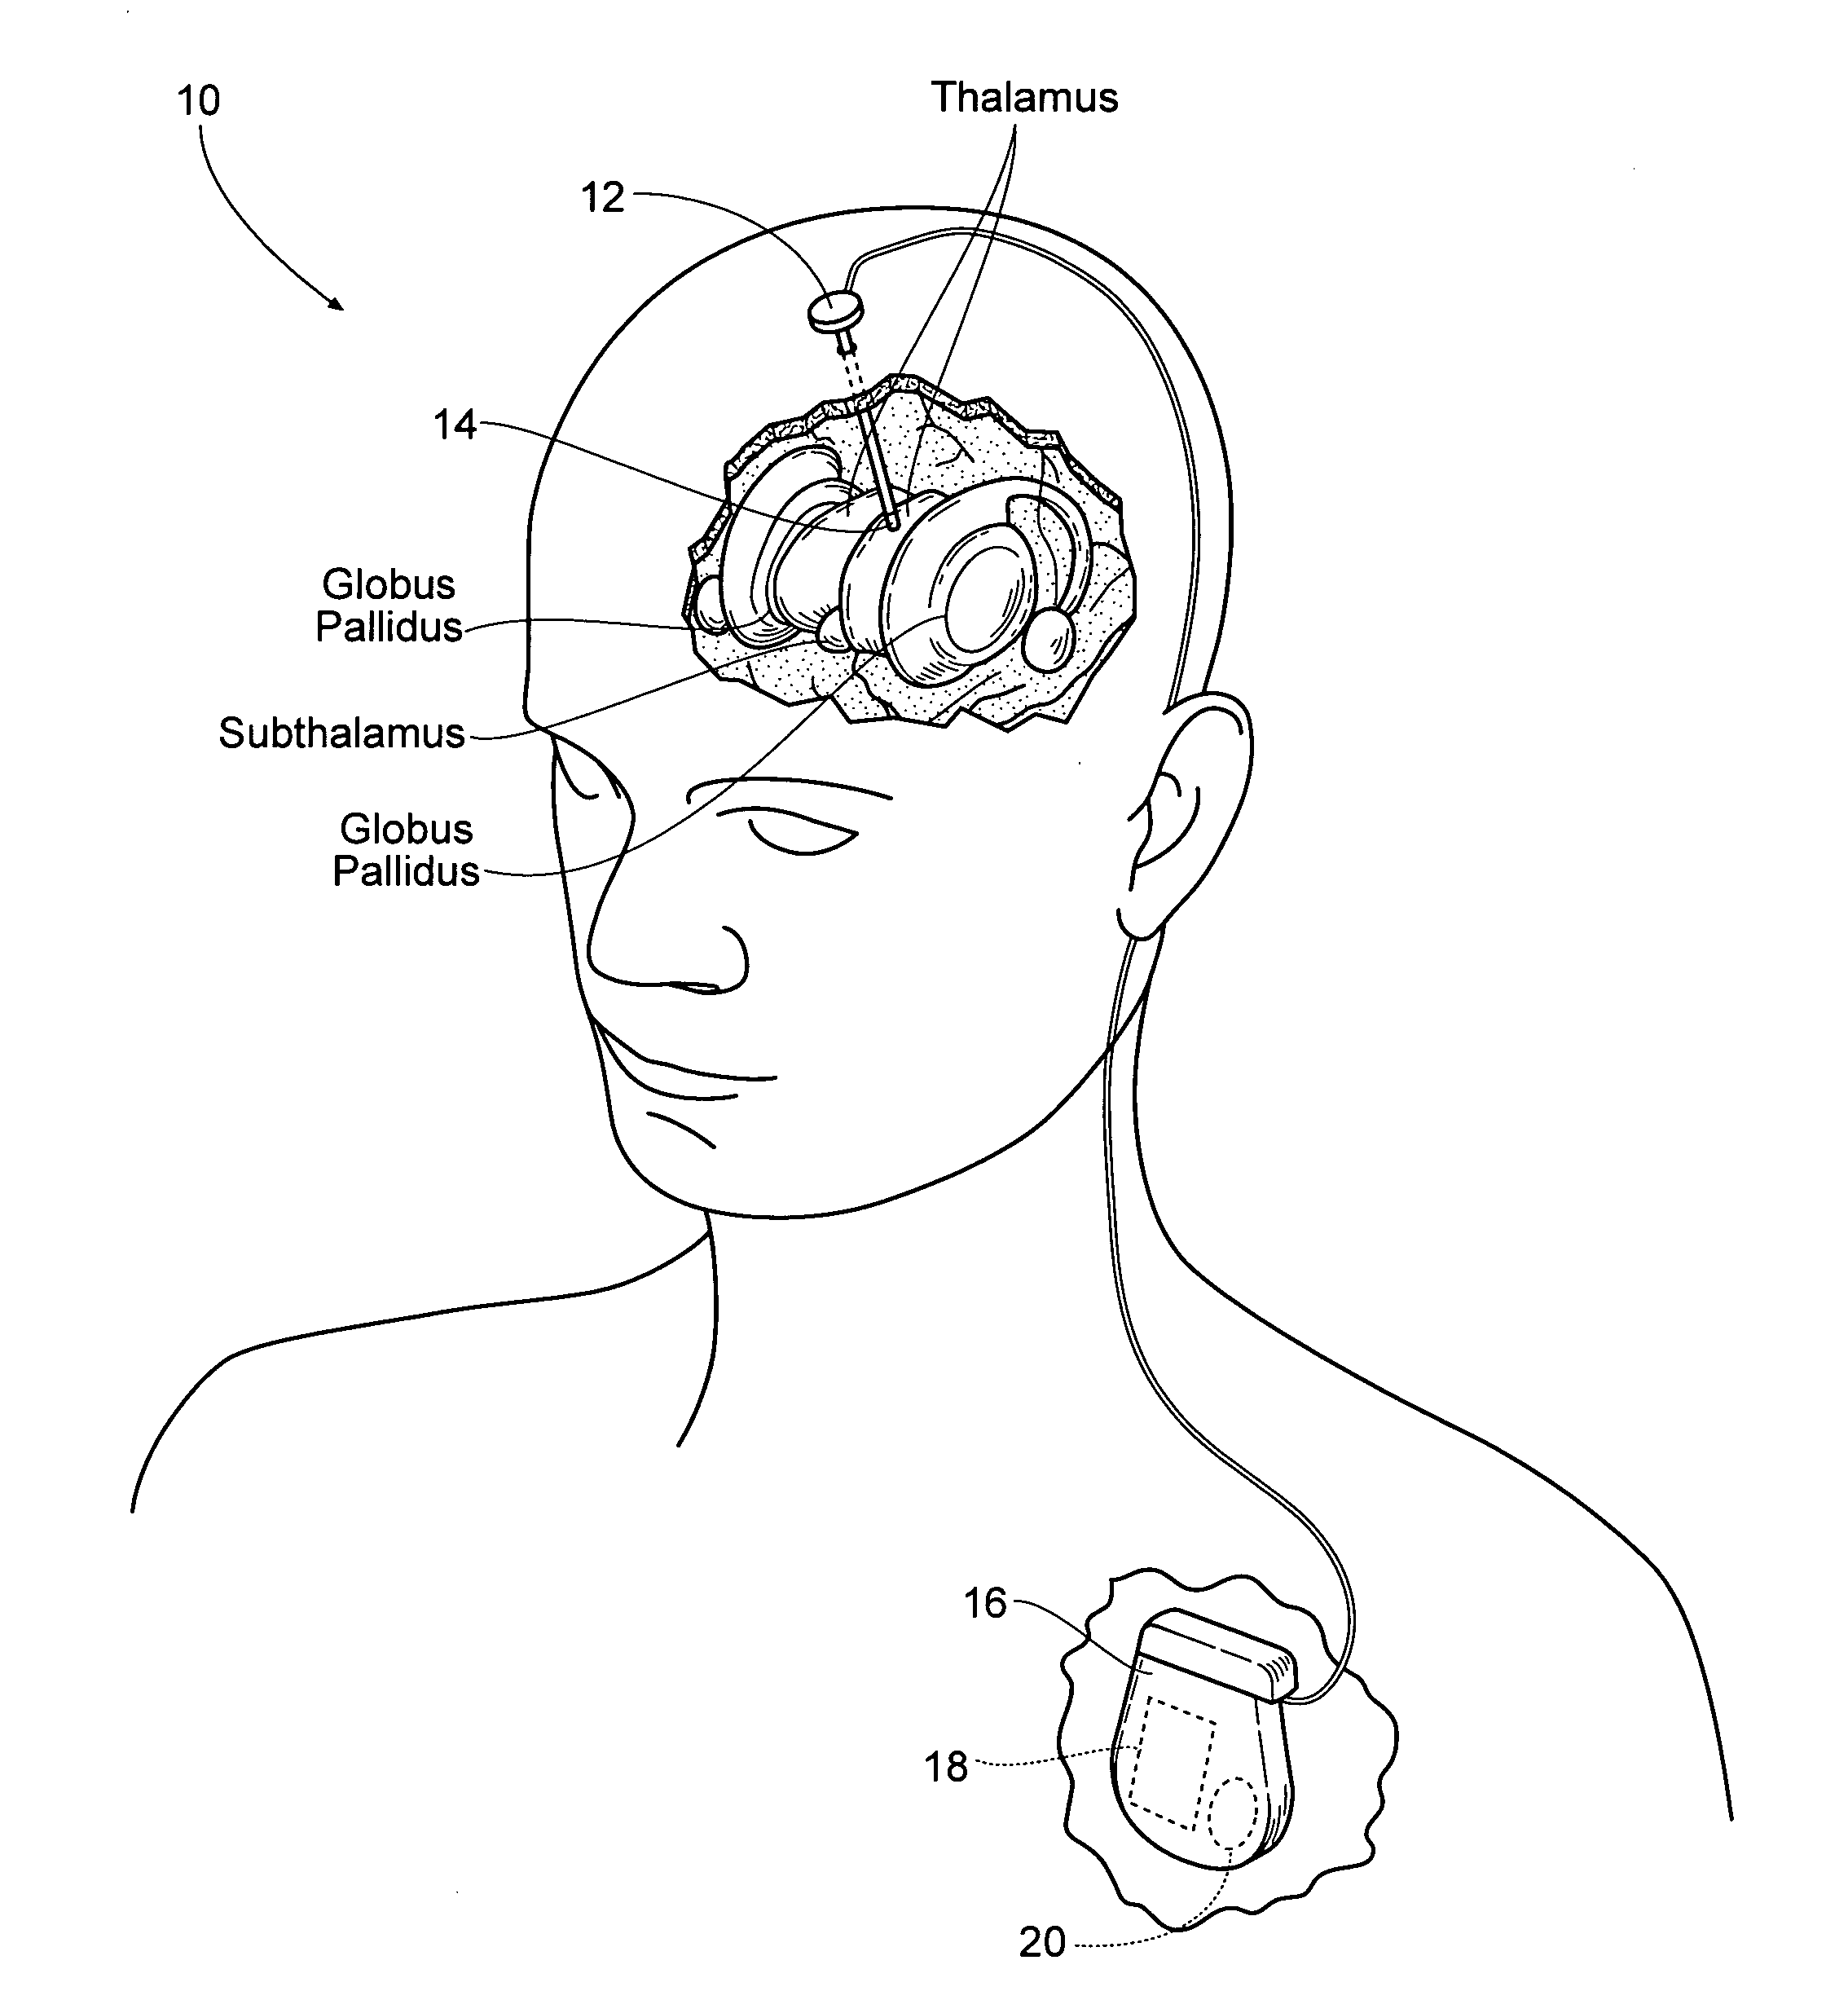 Non-regular electrical stimulation patterns for treating neurological disorders